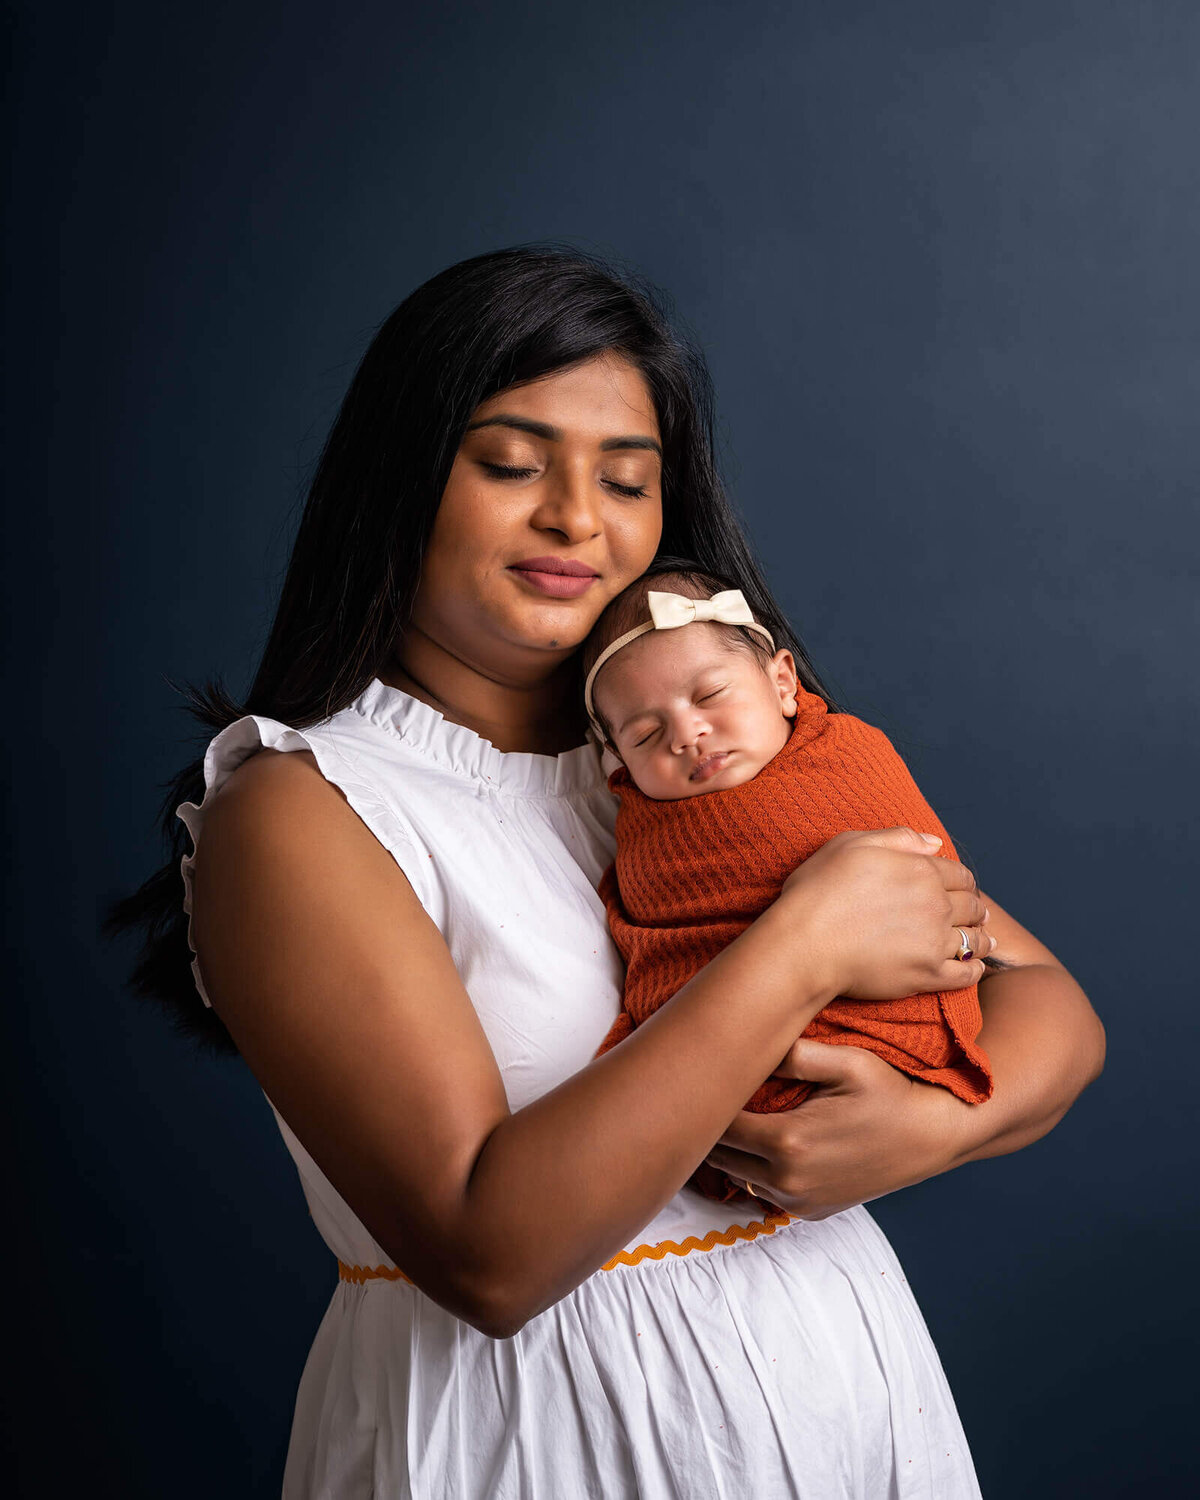 A mama in a white dress holds her newborn baby girl swaddled in a n orange blanket